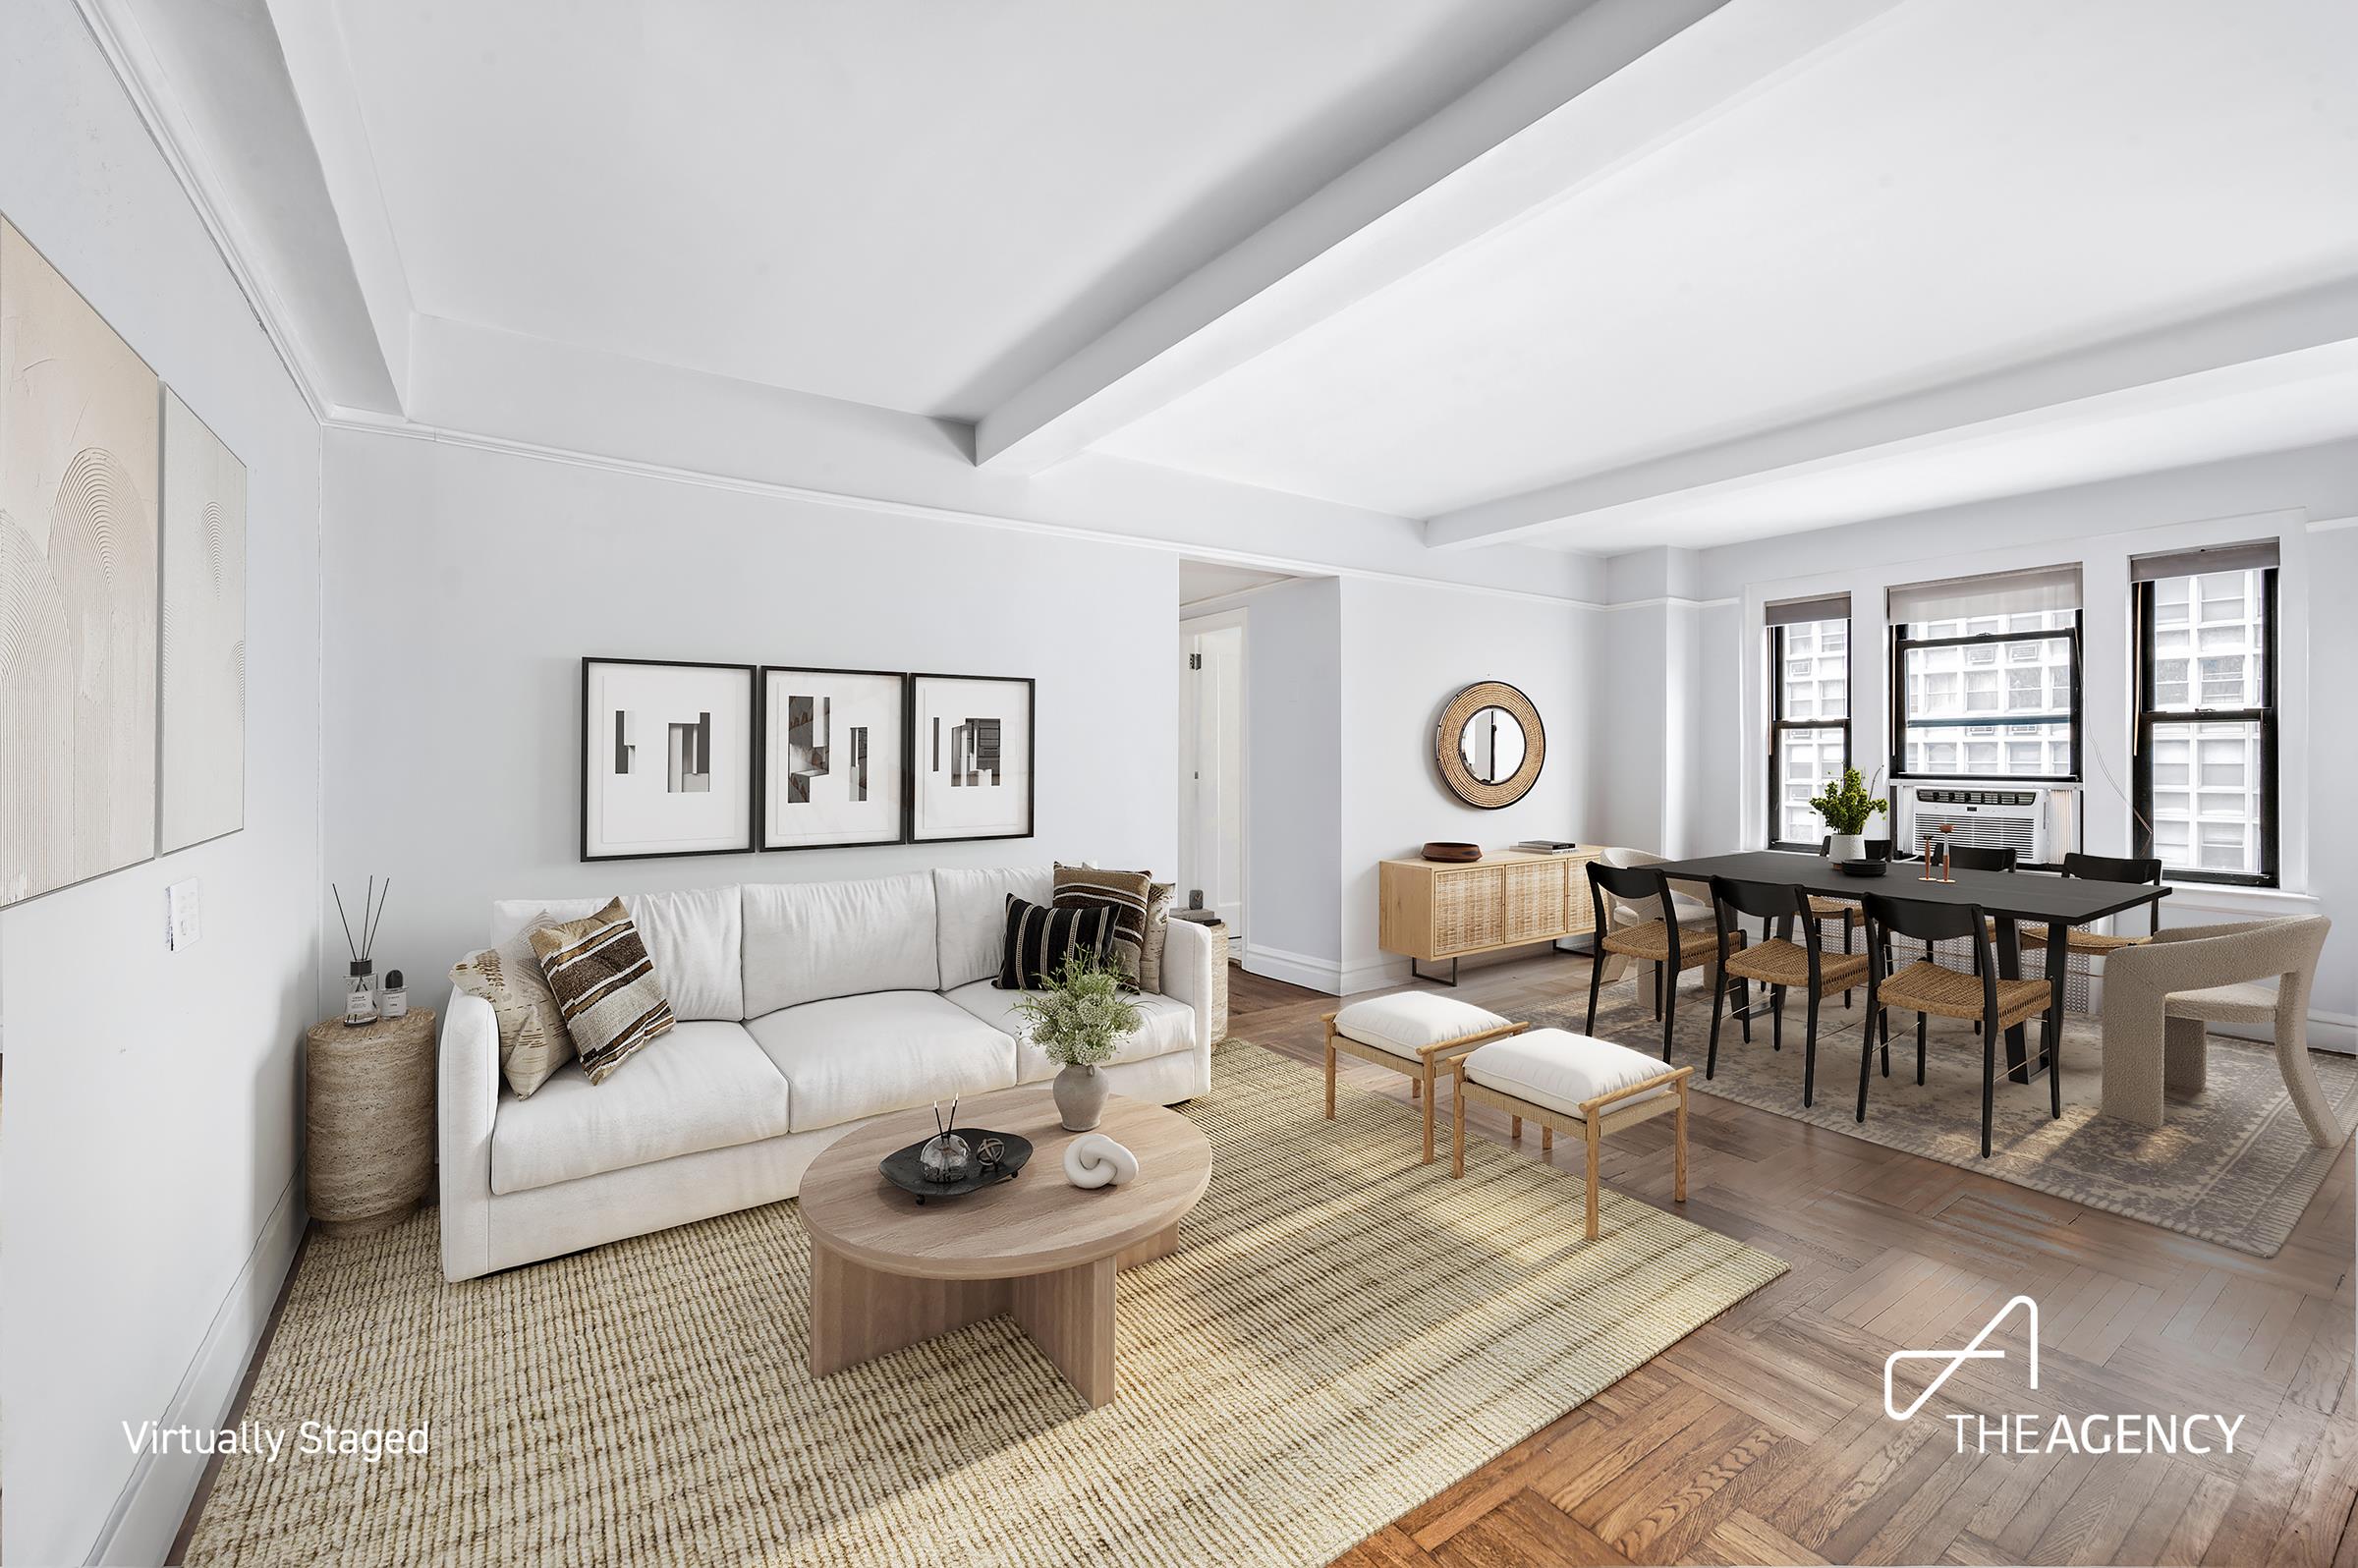 127 West 96th Street 7-Bc, Upper West Side, Upper West Side, NYC - 3 Bedrooms  
2 Bathrooms  
5 Rooms - 